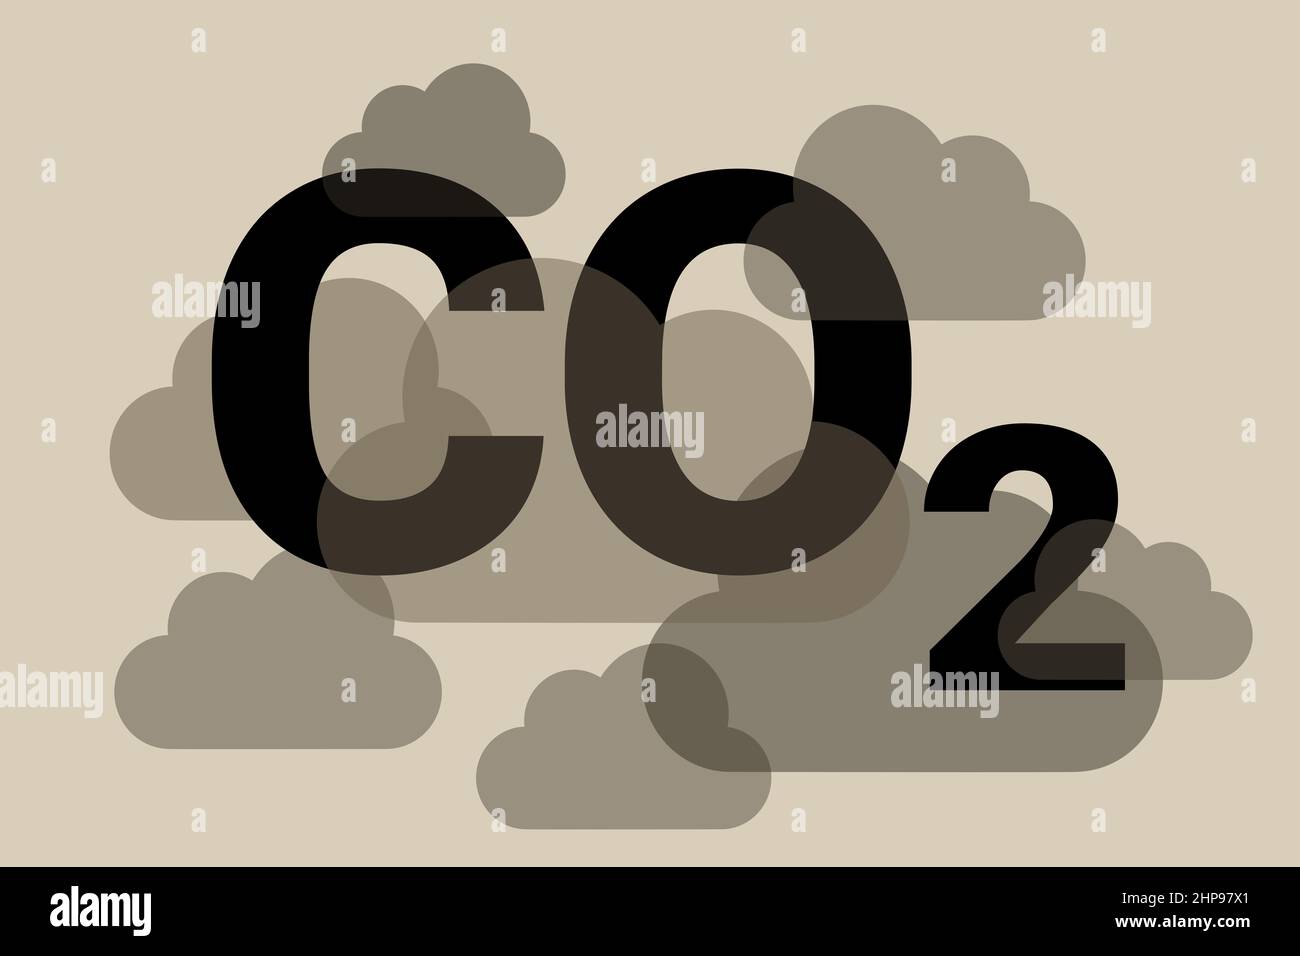 CO2, Carbon Dioxide and greenhouse gas. Air pollution - dirty air is polluted by toxic emission, exhaust and fume. Vector illustration of clouds and t Stock Photo